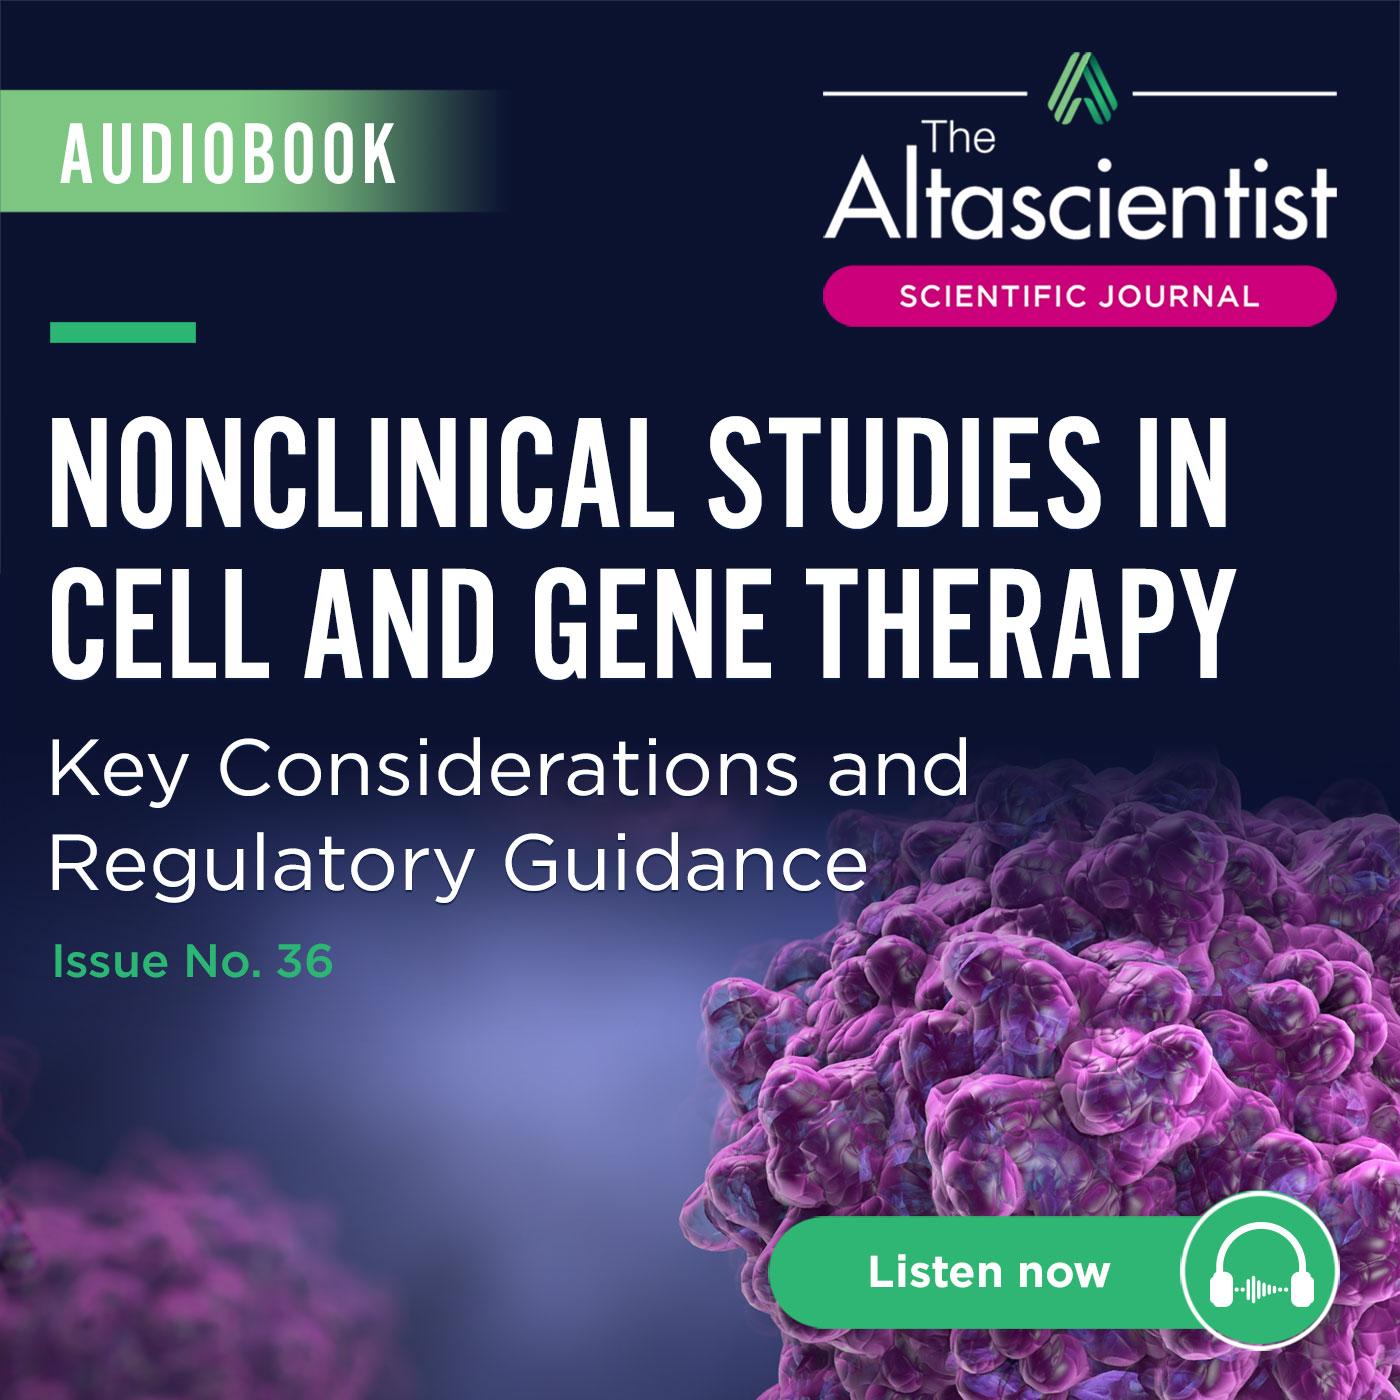 Audiobook: Nonclinical Studies in Cell and Gene Therapy: Key Considerations and Regulatory Guidance.